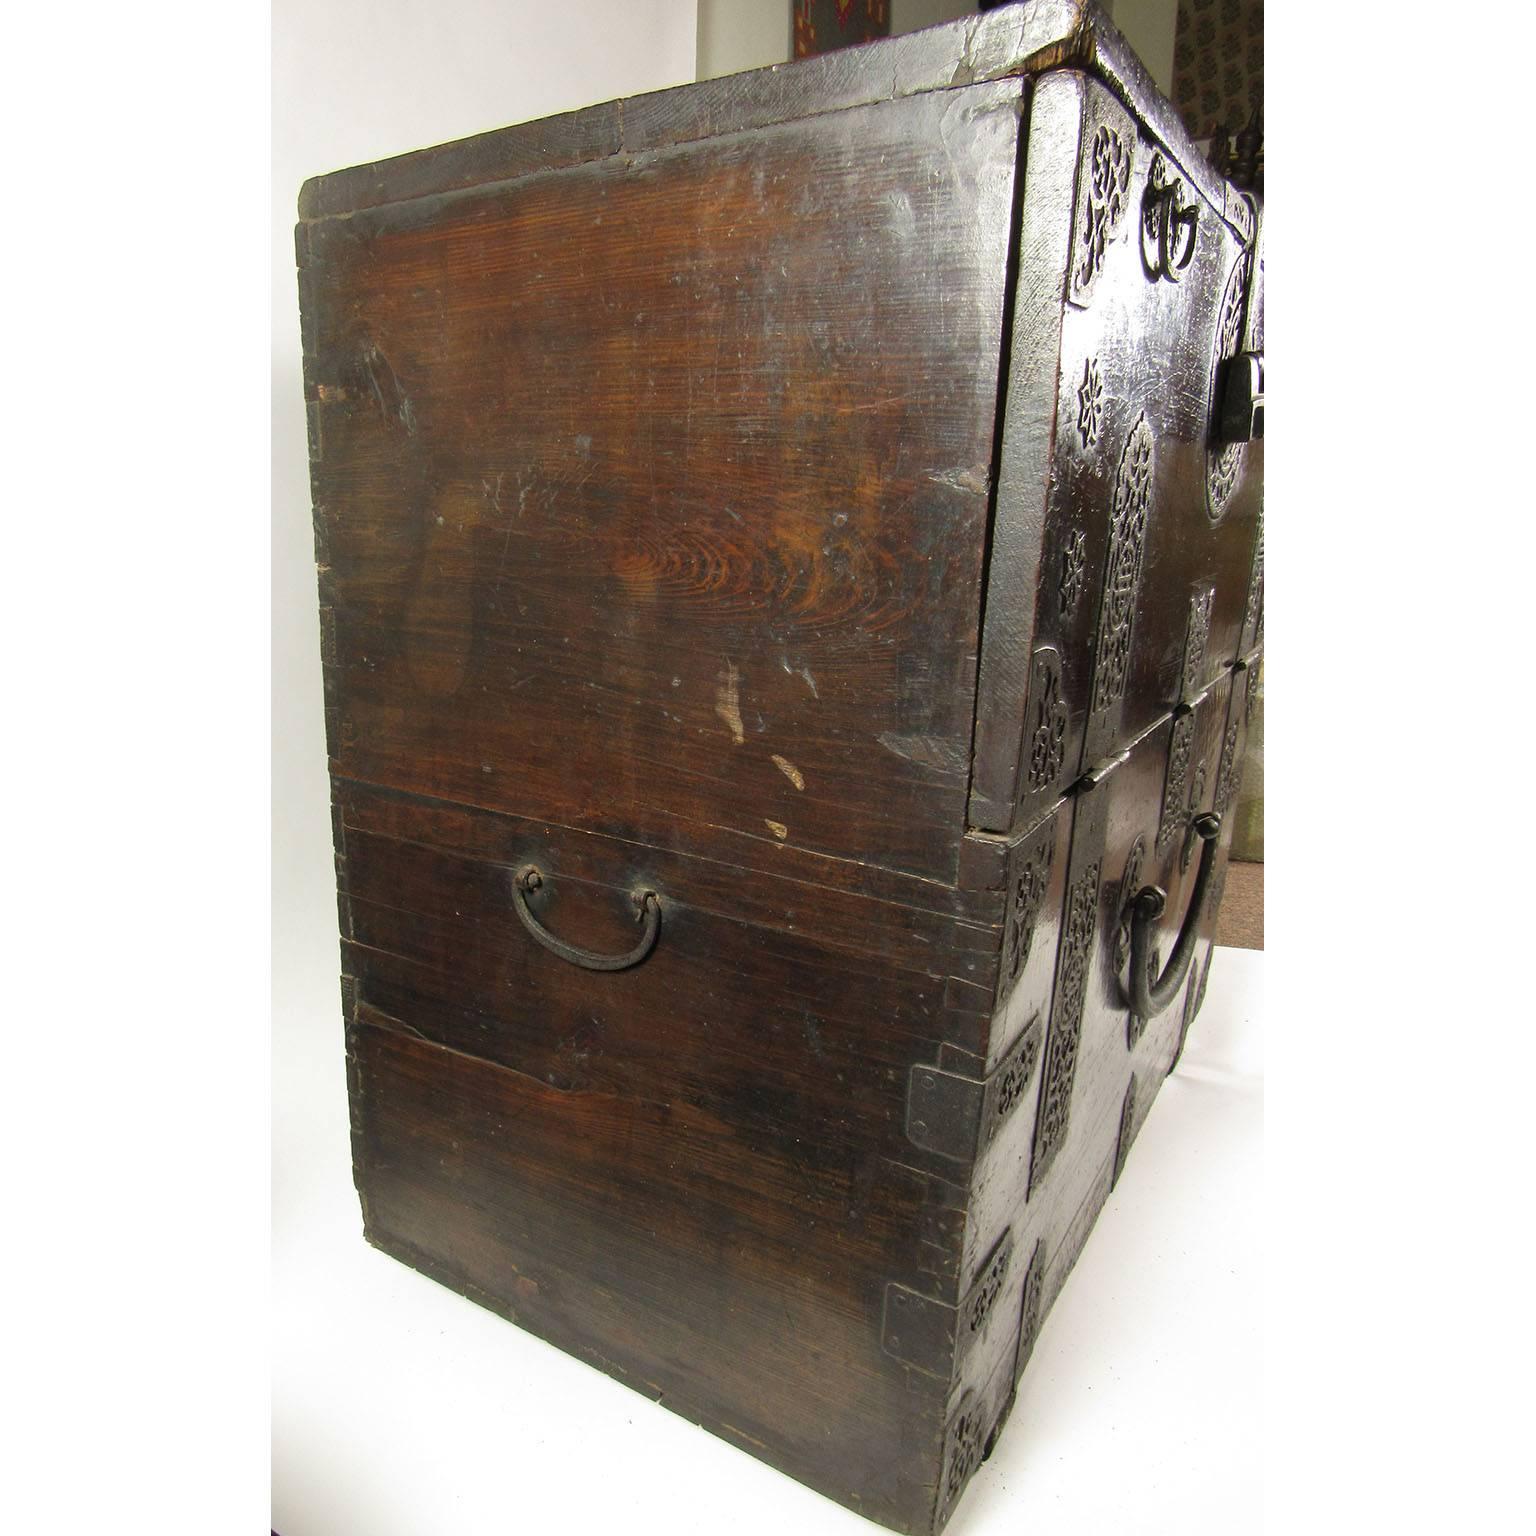 19th Century Korean Hardwood Bandaji Blanket Chest with Iron Mounts In Good Condition For Sale In Concord, MA